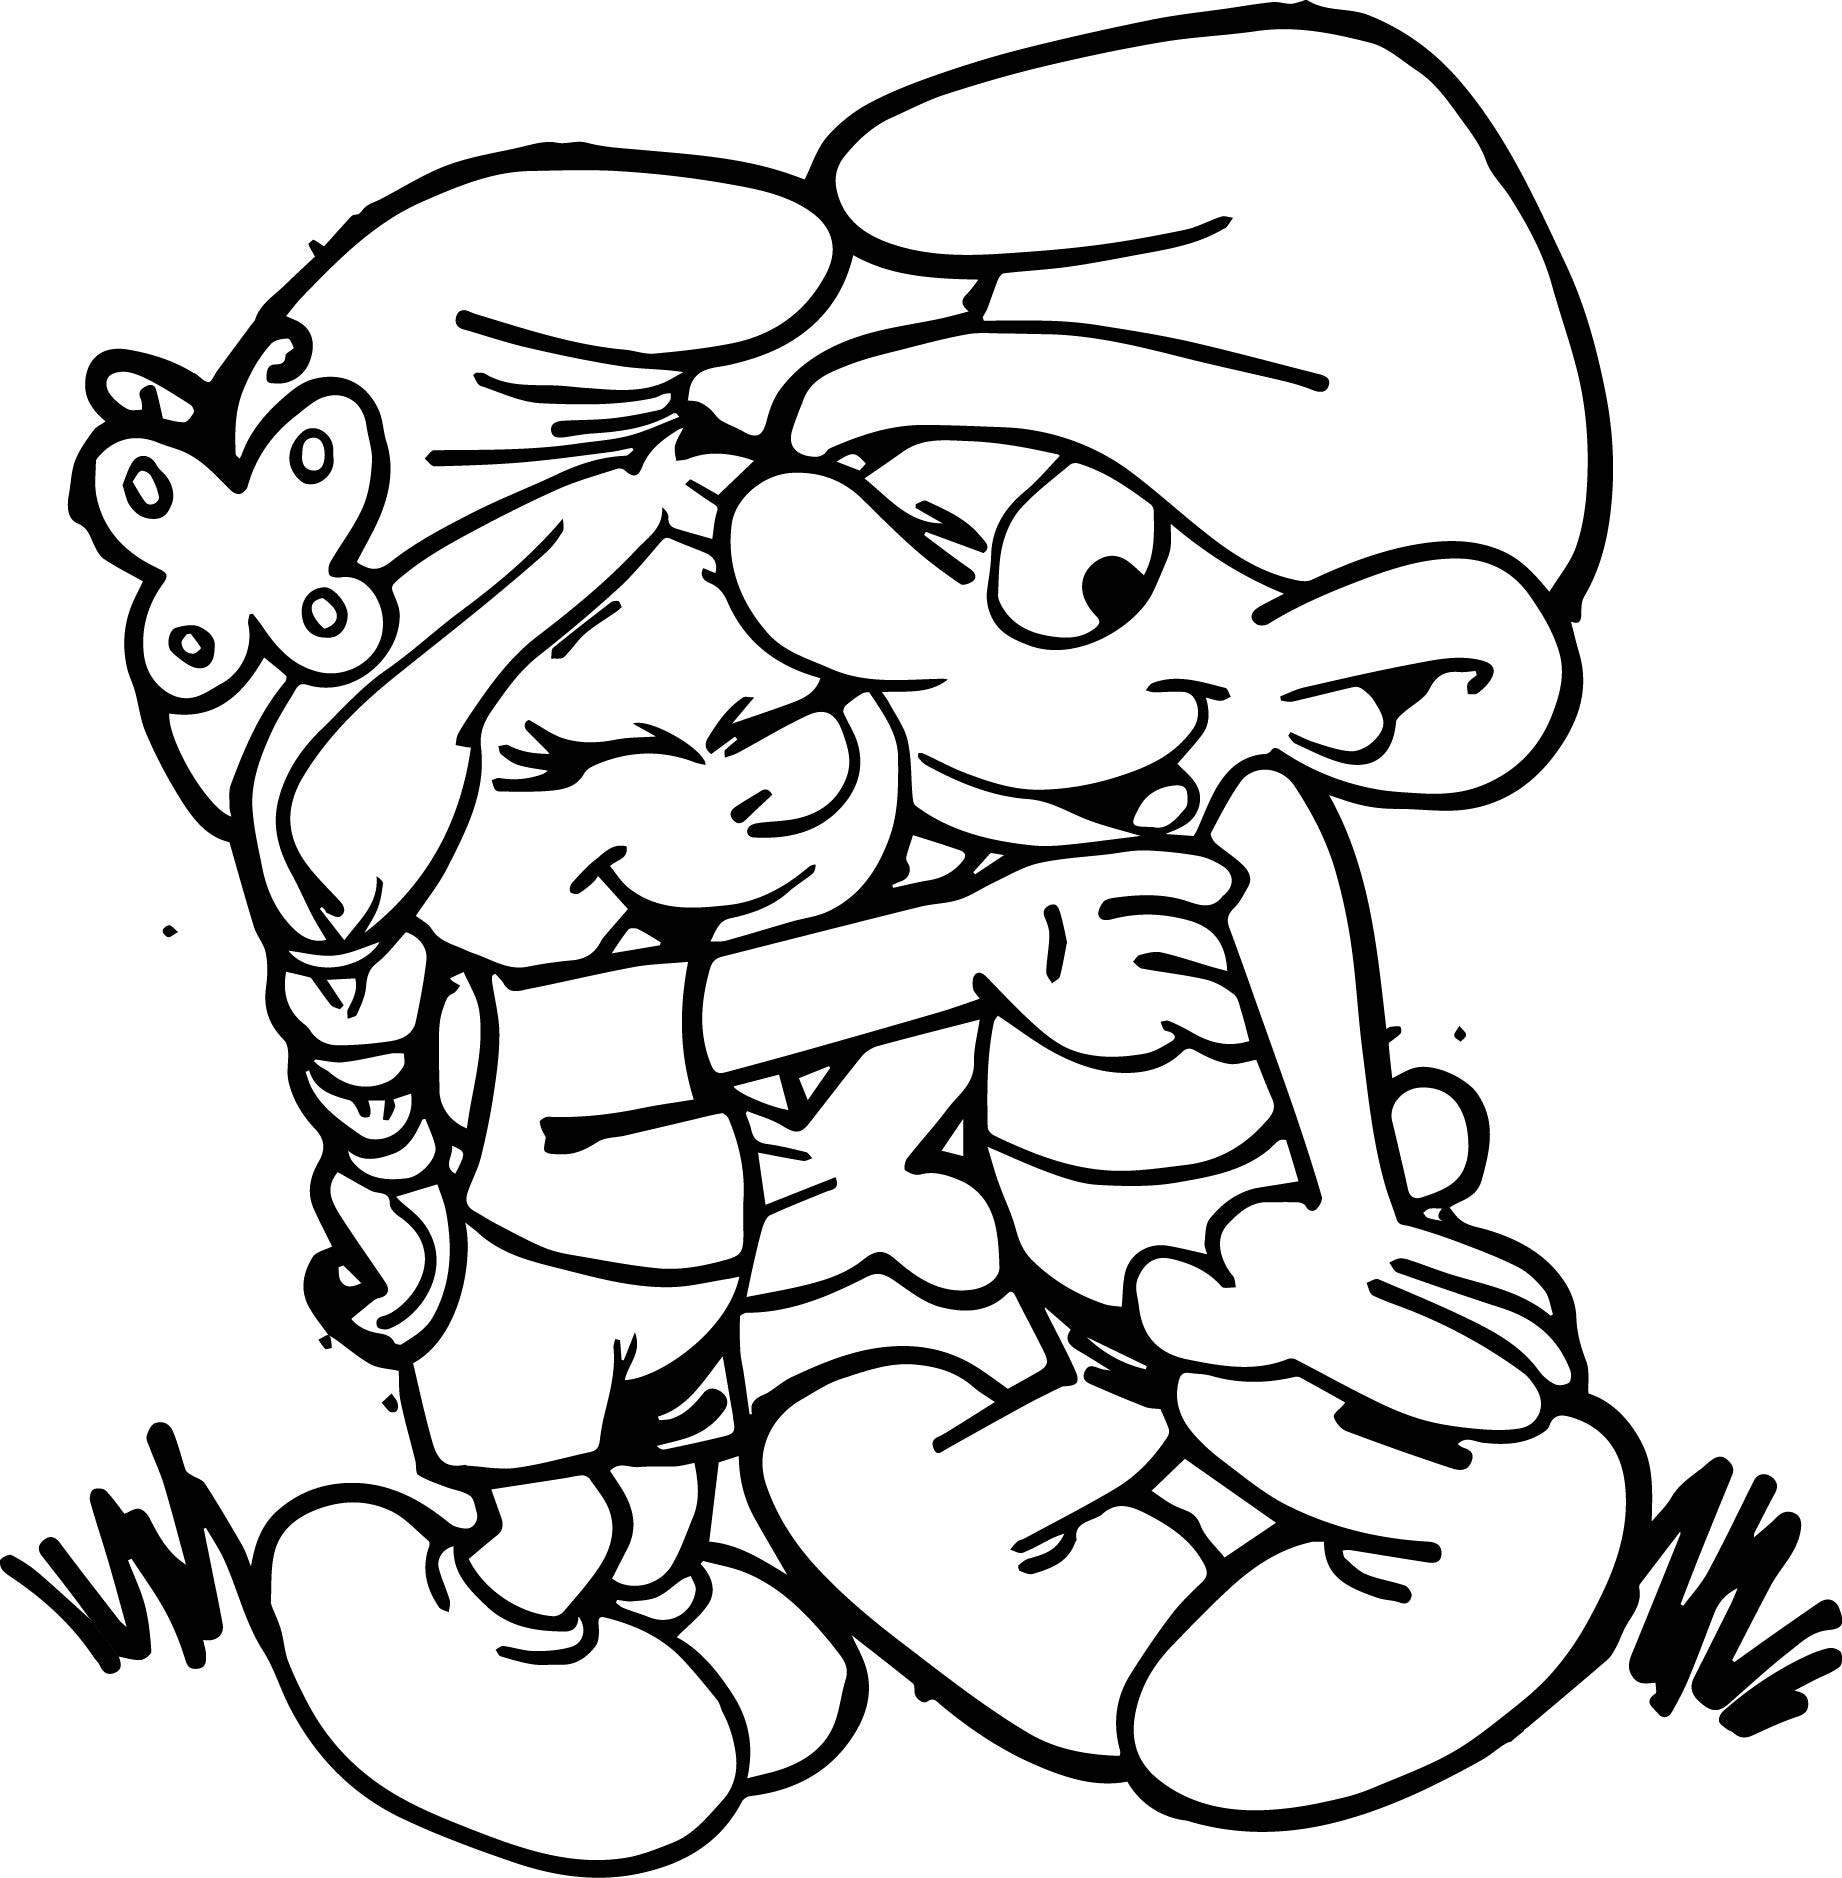 The Smurfs Coloring Pages at GetDrawings Free download